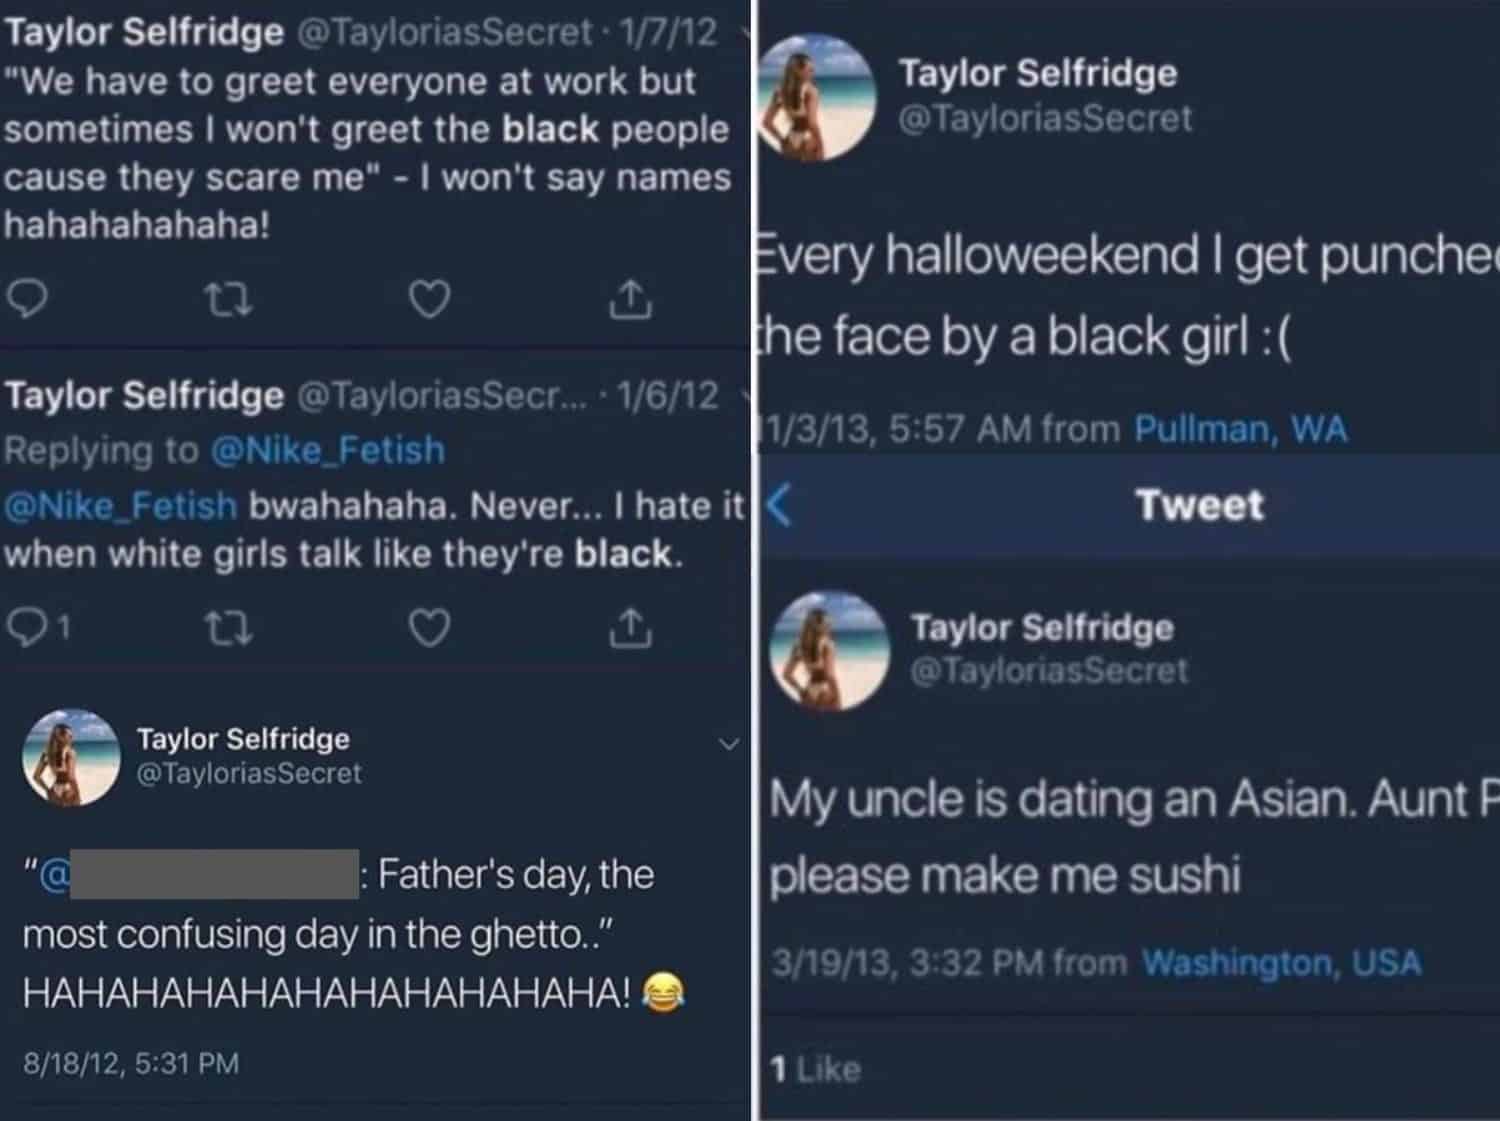 Screenshots from her Twitter account posting racist messages against African and Asian descent